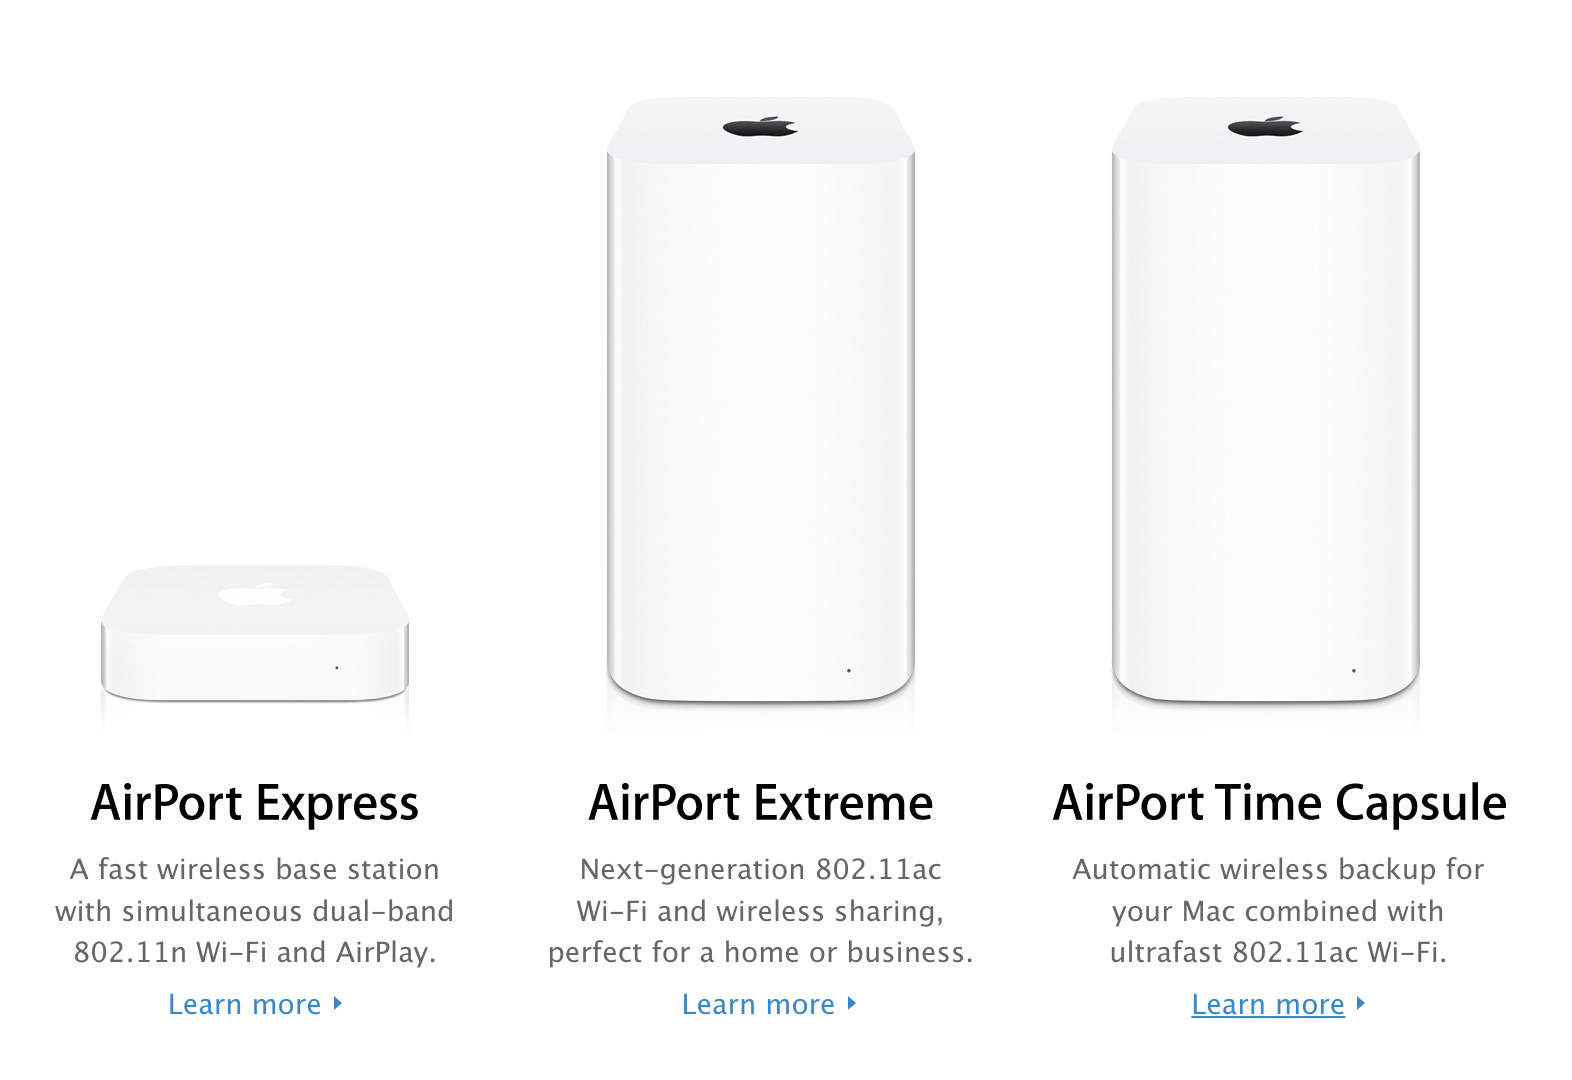 Does Apple (AAPL) Sell a Wireless Router? What Happened to the